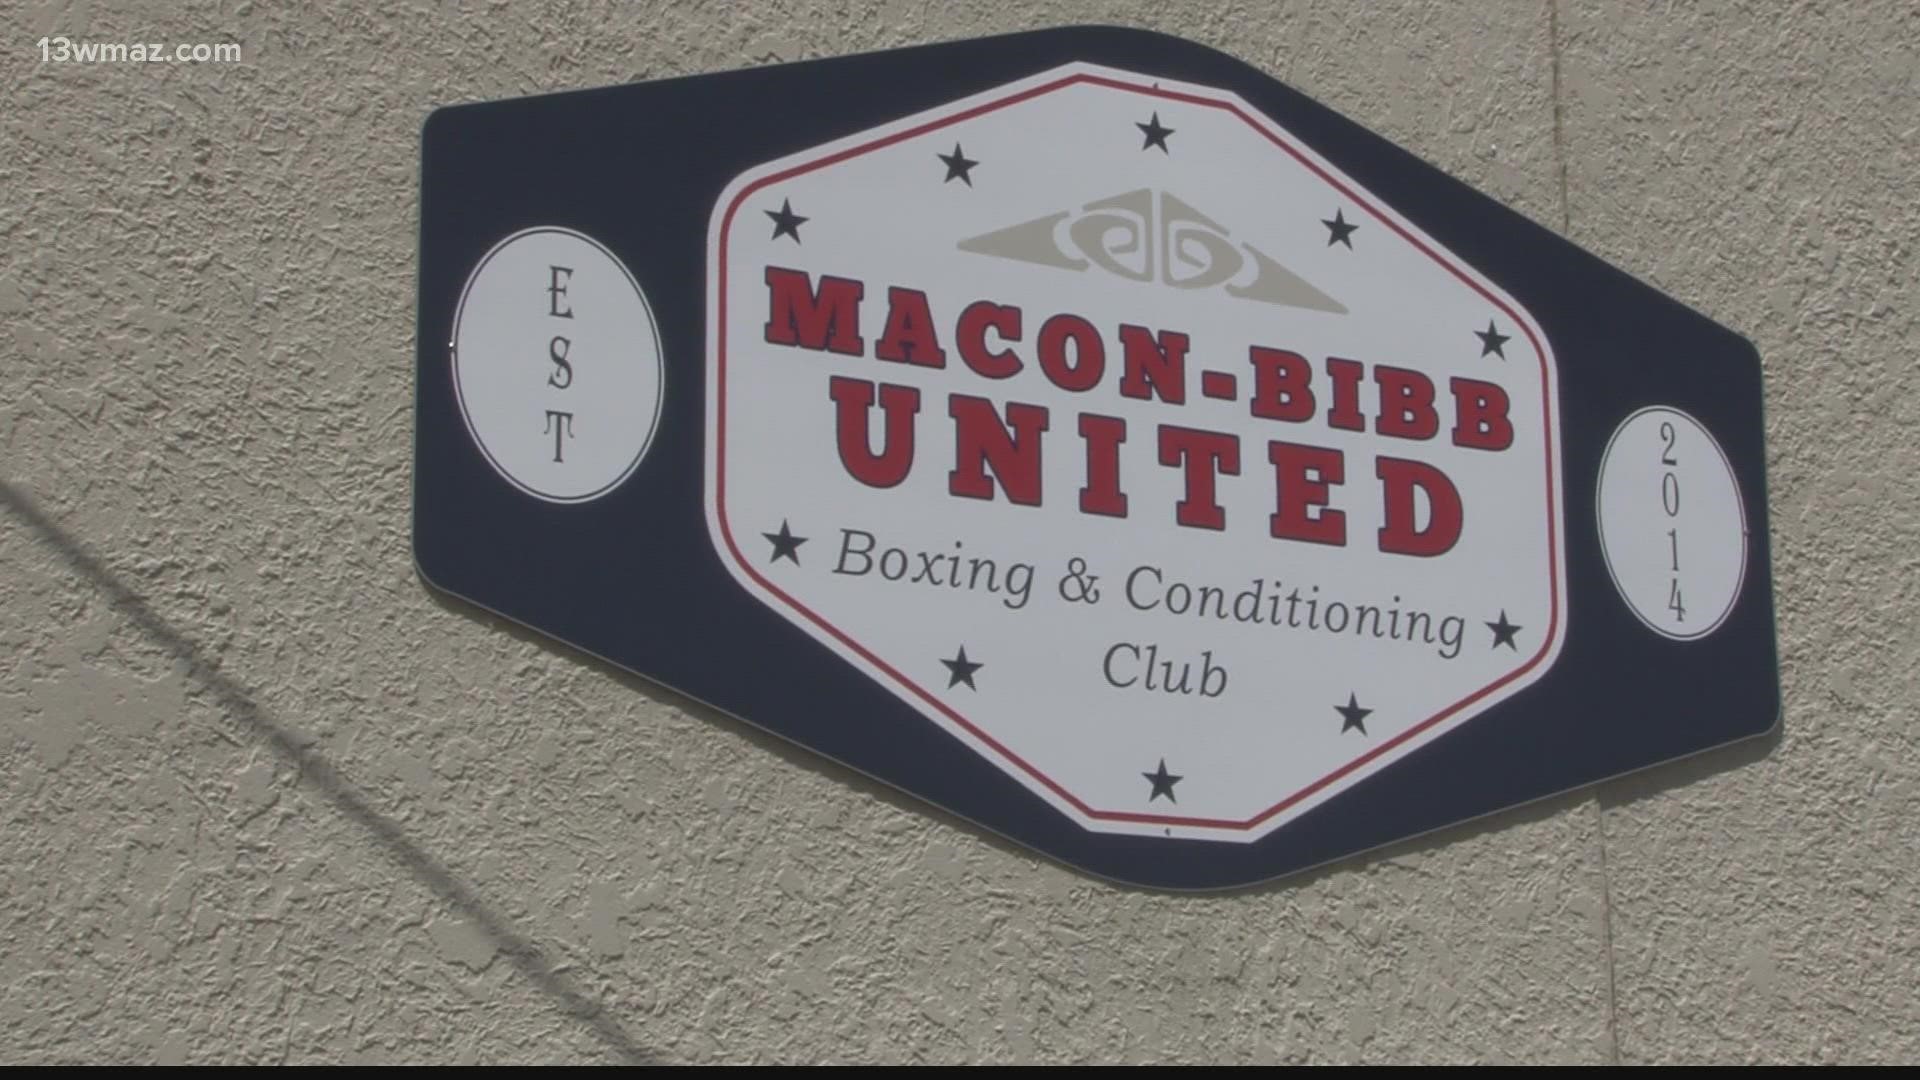 Over 500 boxers came to Macon to show their stuff in the ring.